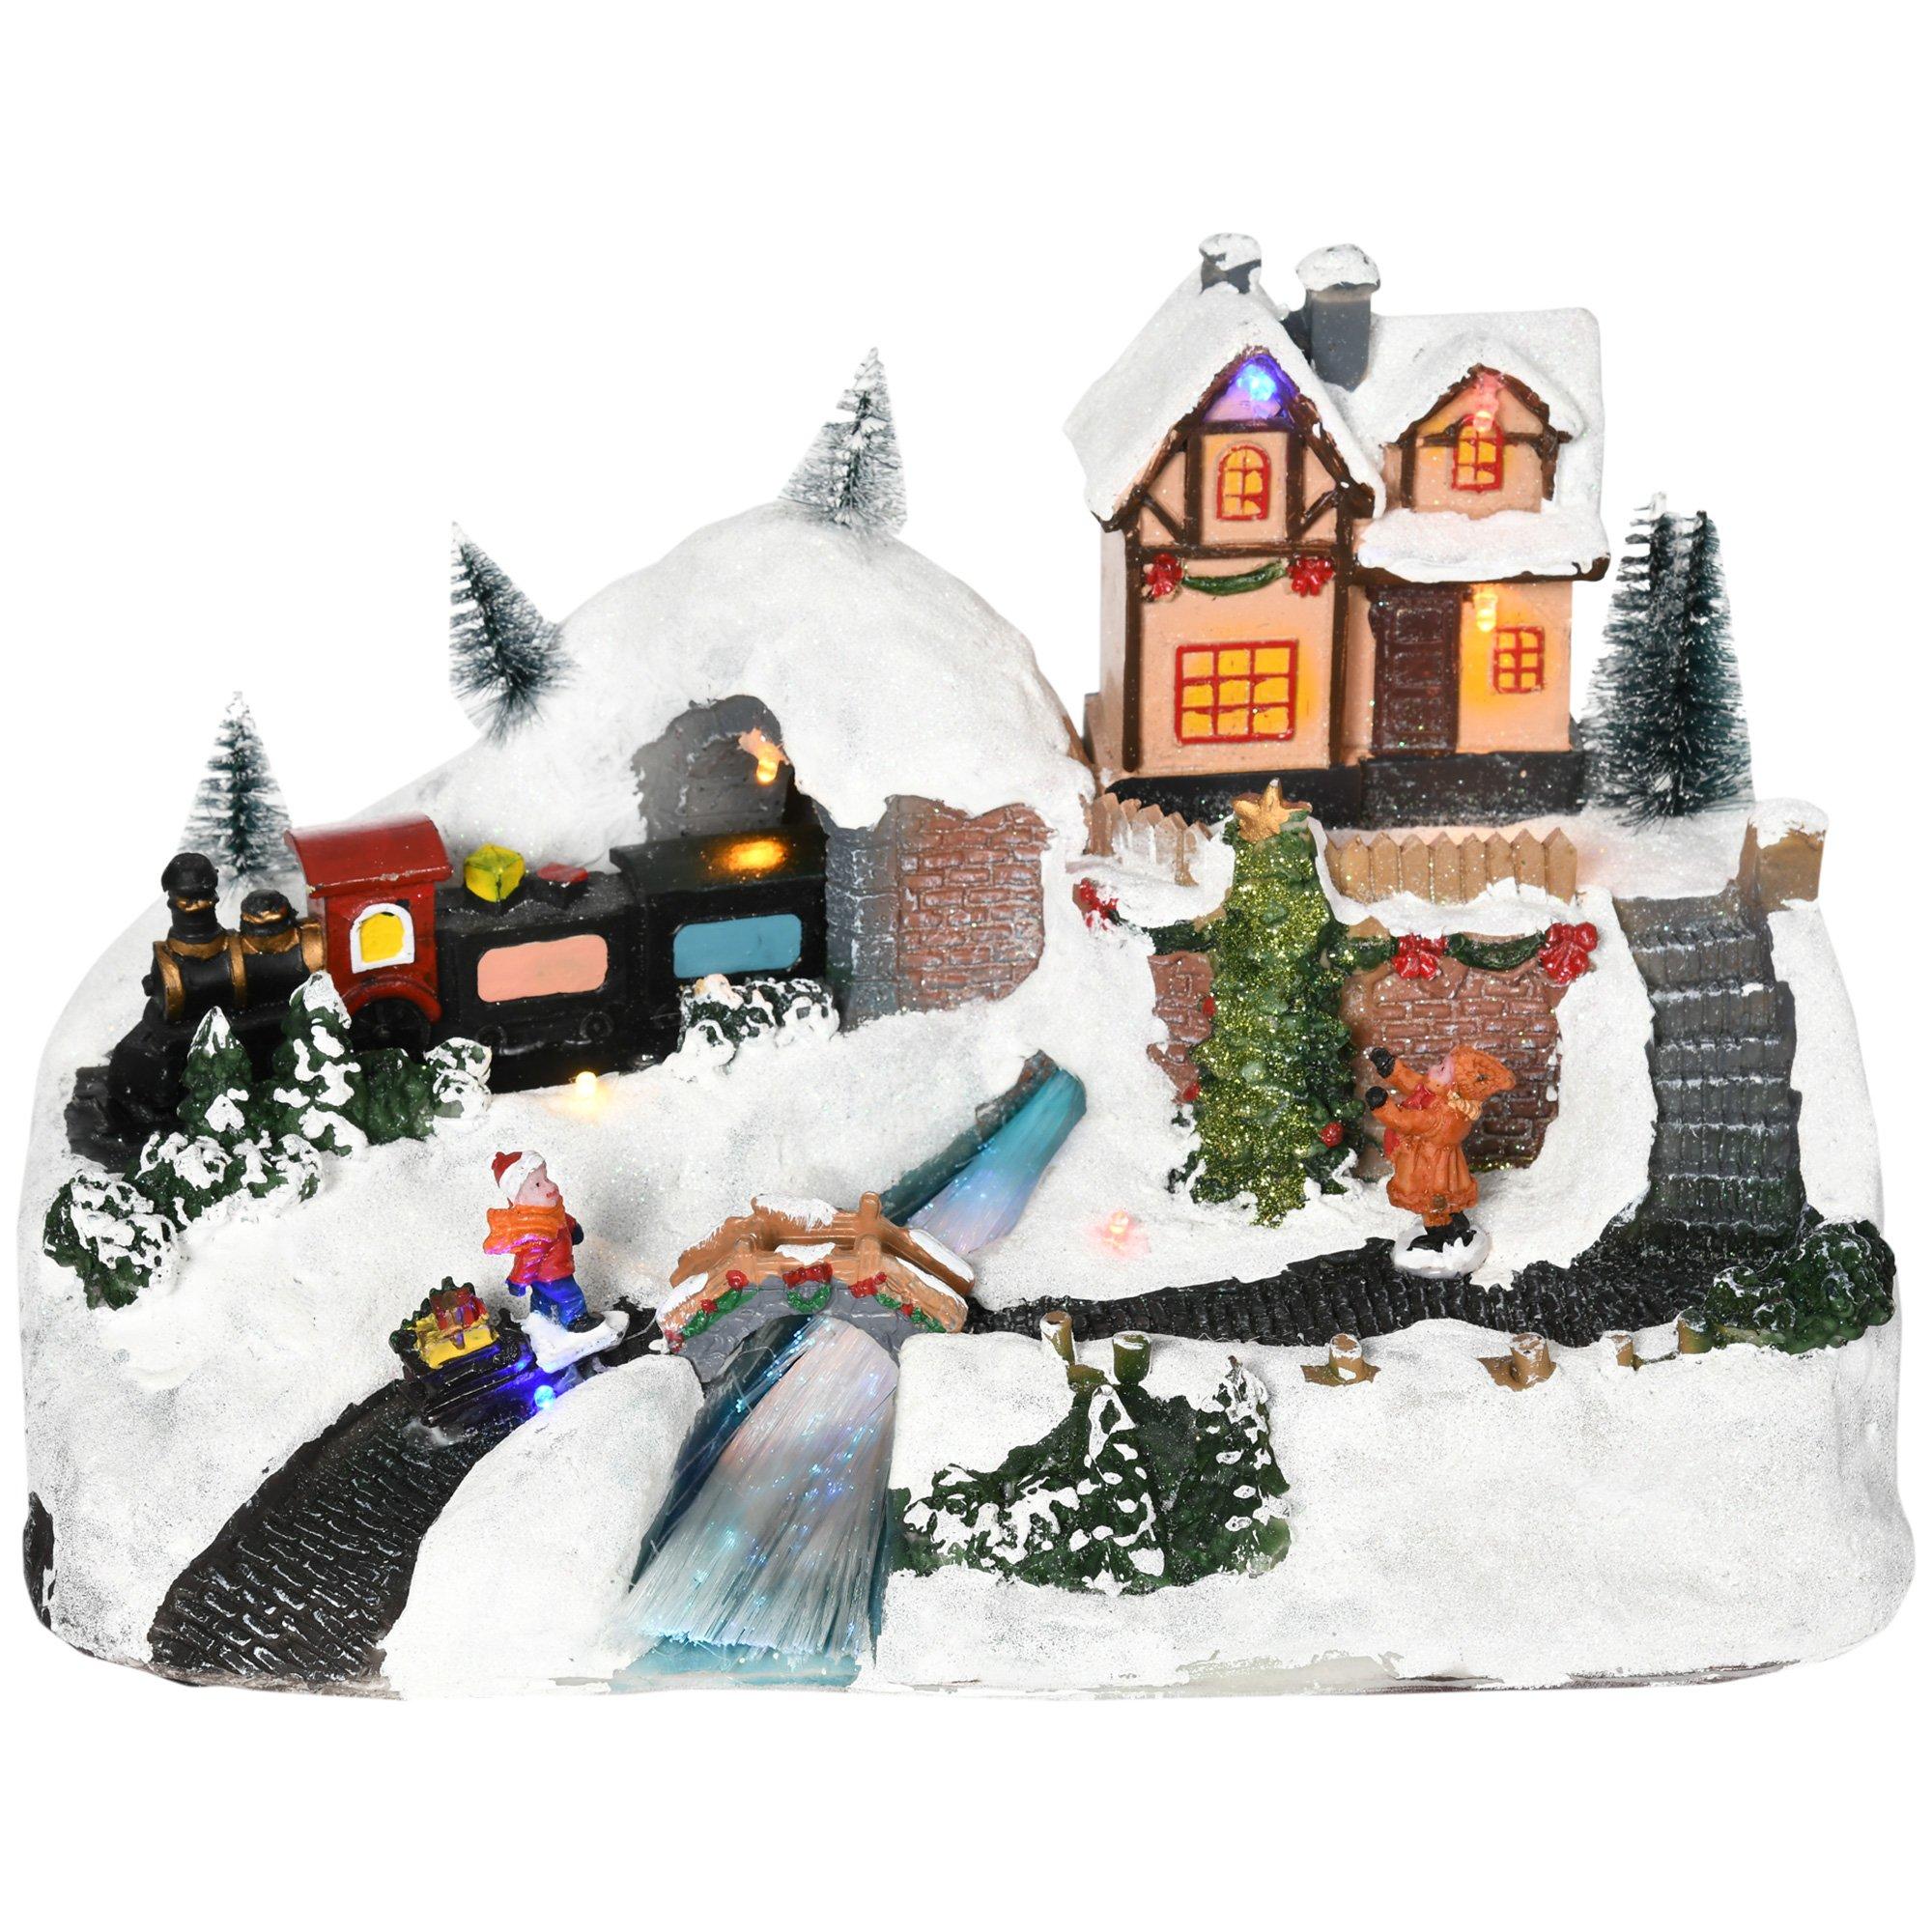 Musical Christmas Village Scene LED Battery Operated Decoration